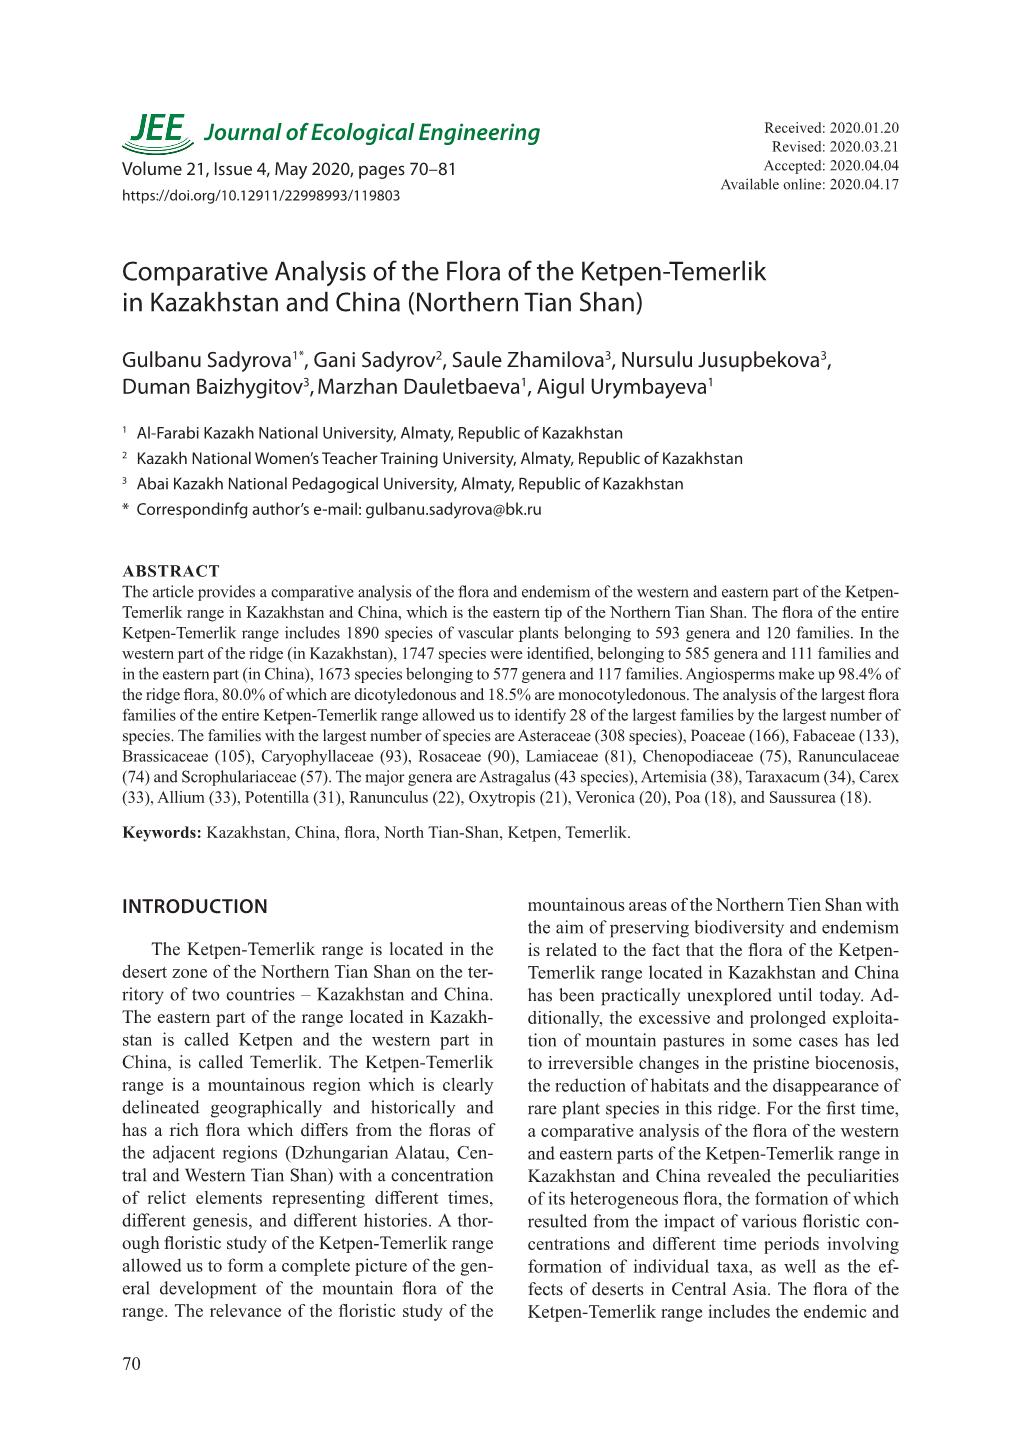 Comparative Analysis of the Flora of the Ketpen-Temerlik in Kazakhstan and China (Northern Tian Shan)